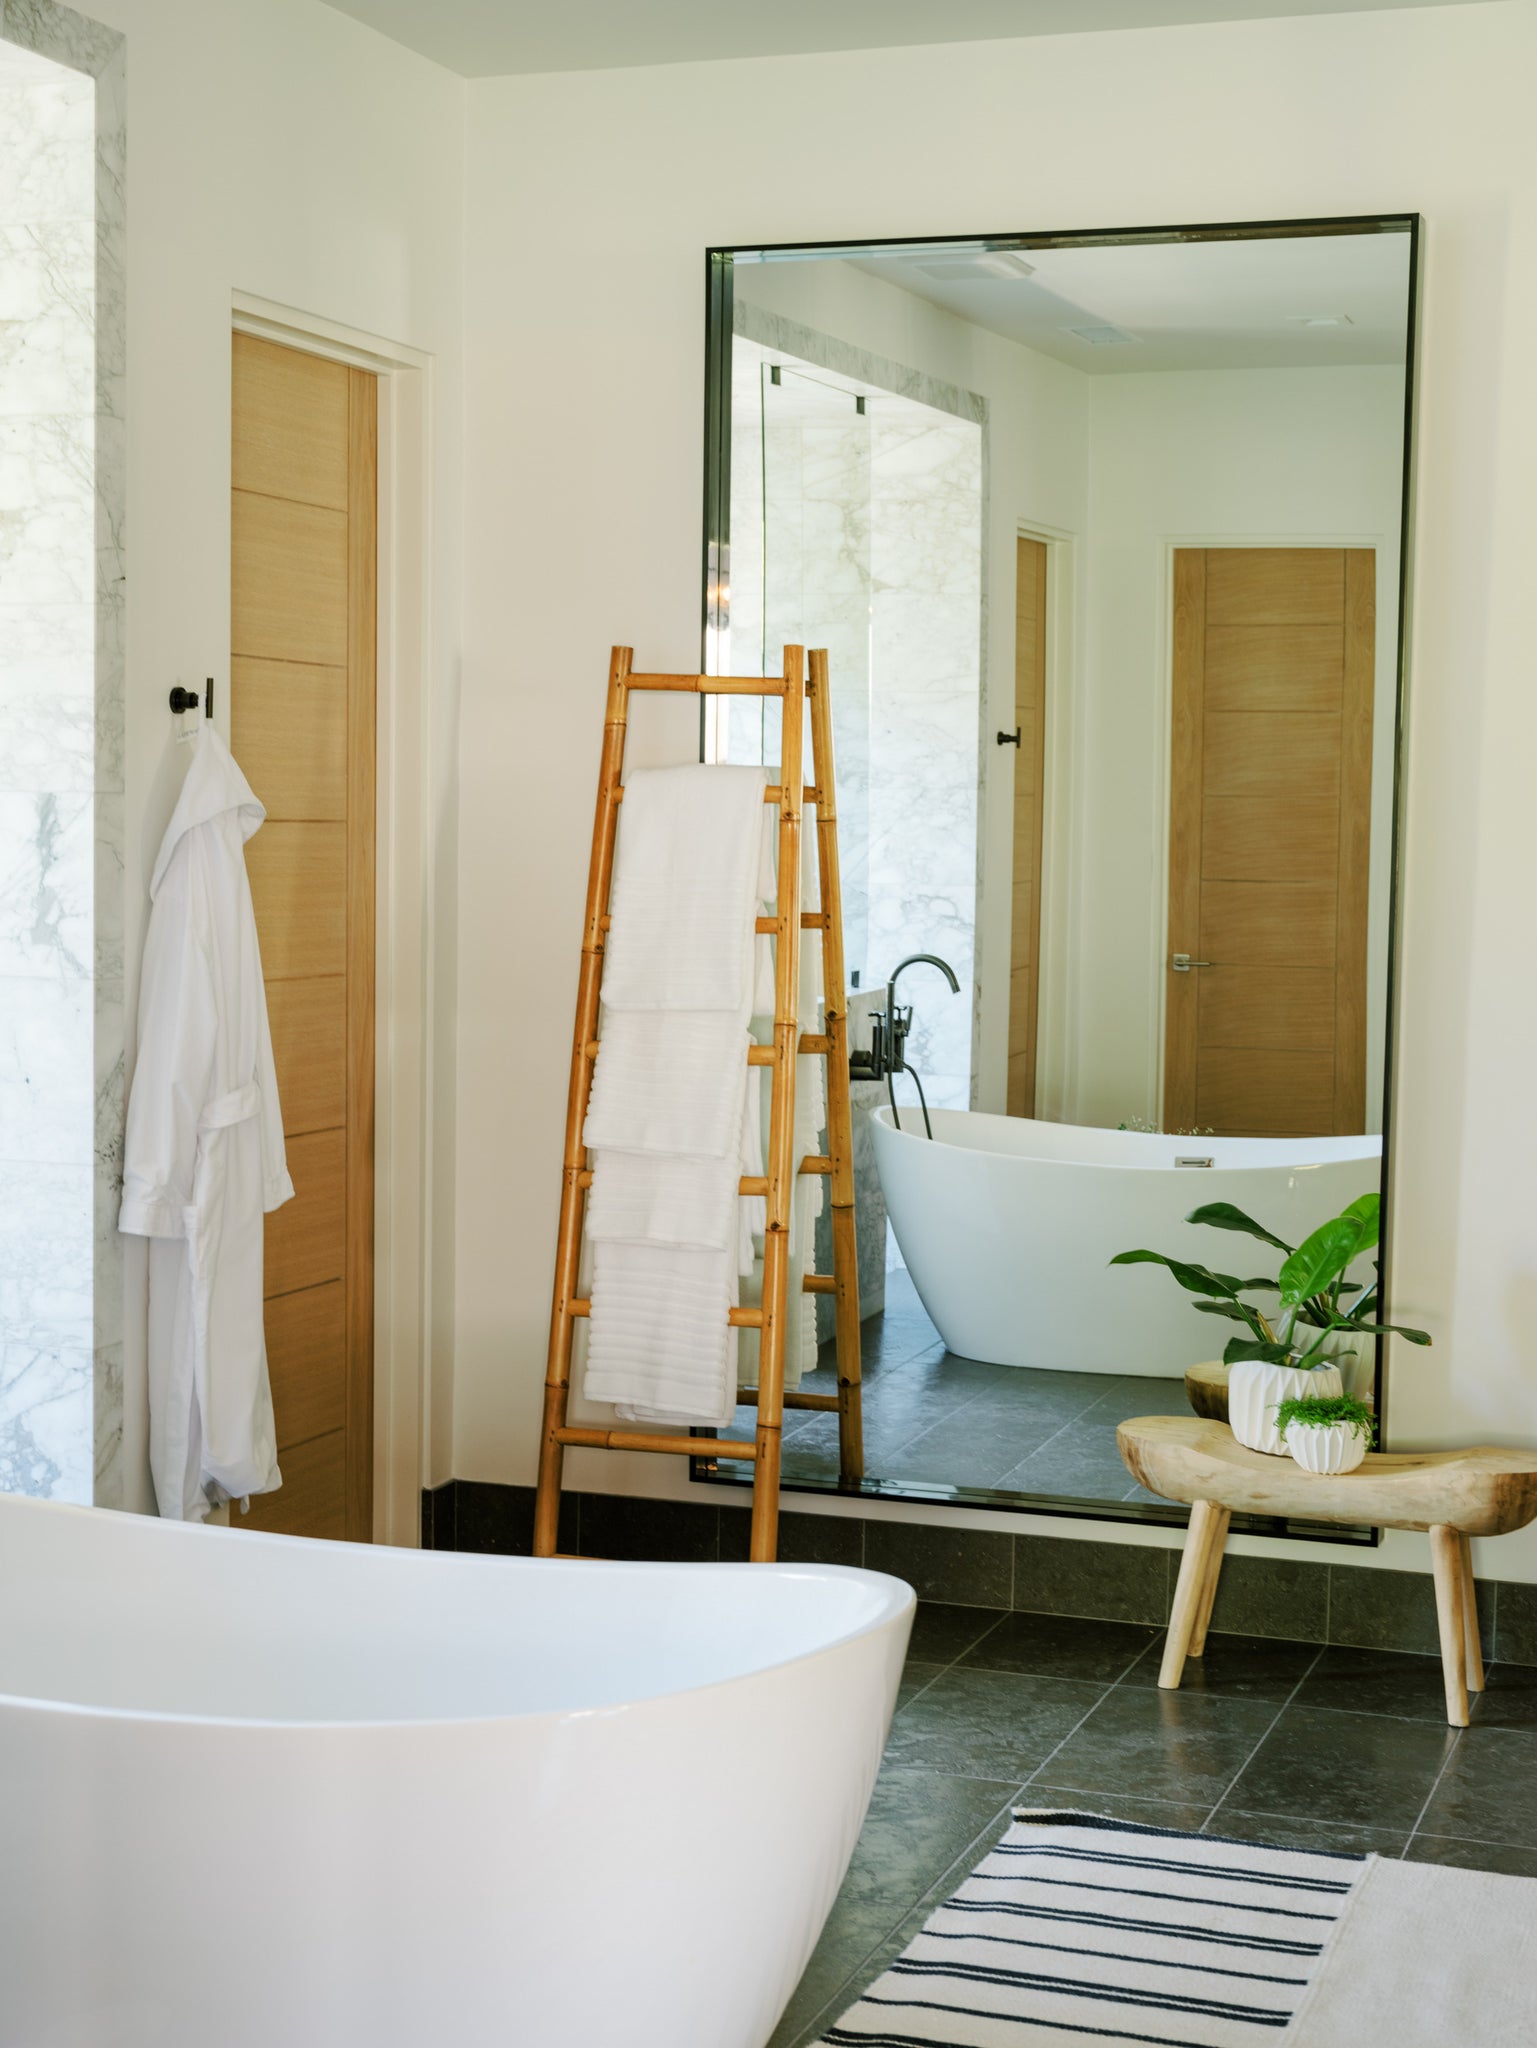 Keep your bathroom open, airy and clutter free